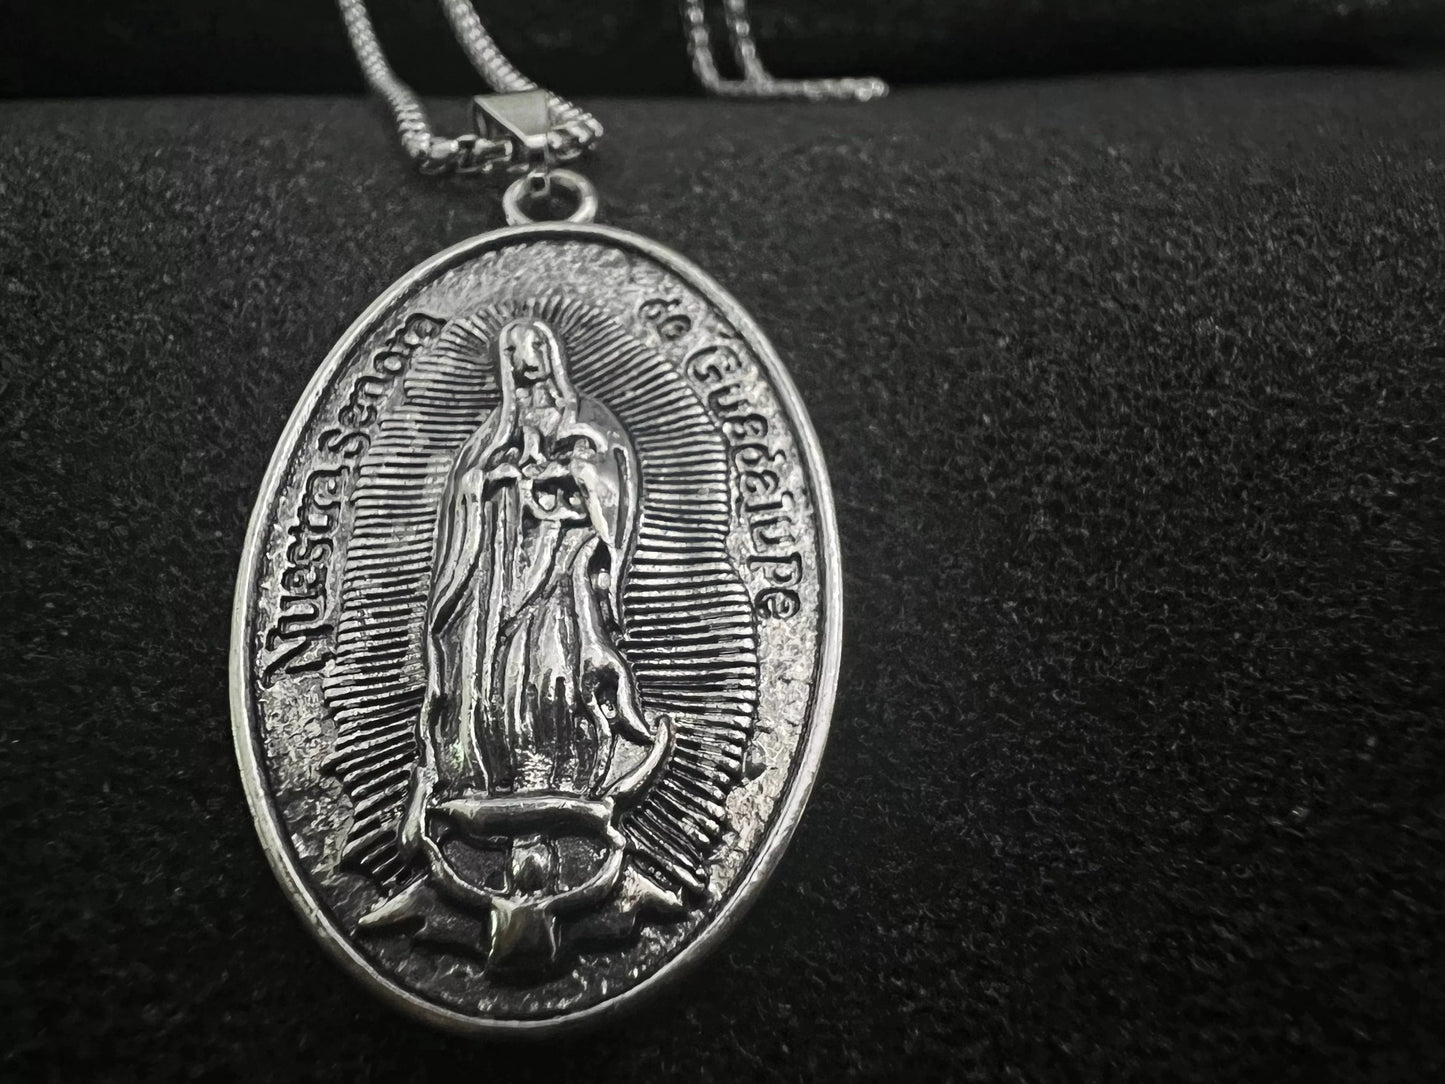 THE MEN THING Alloy Jesus Card Pendant with Pure Stainless Steel 24inch Chain for Men, American trending Style - Round Box Chain & Pendant for Men & Boy